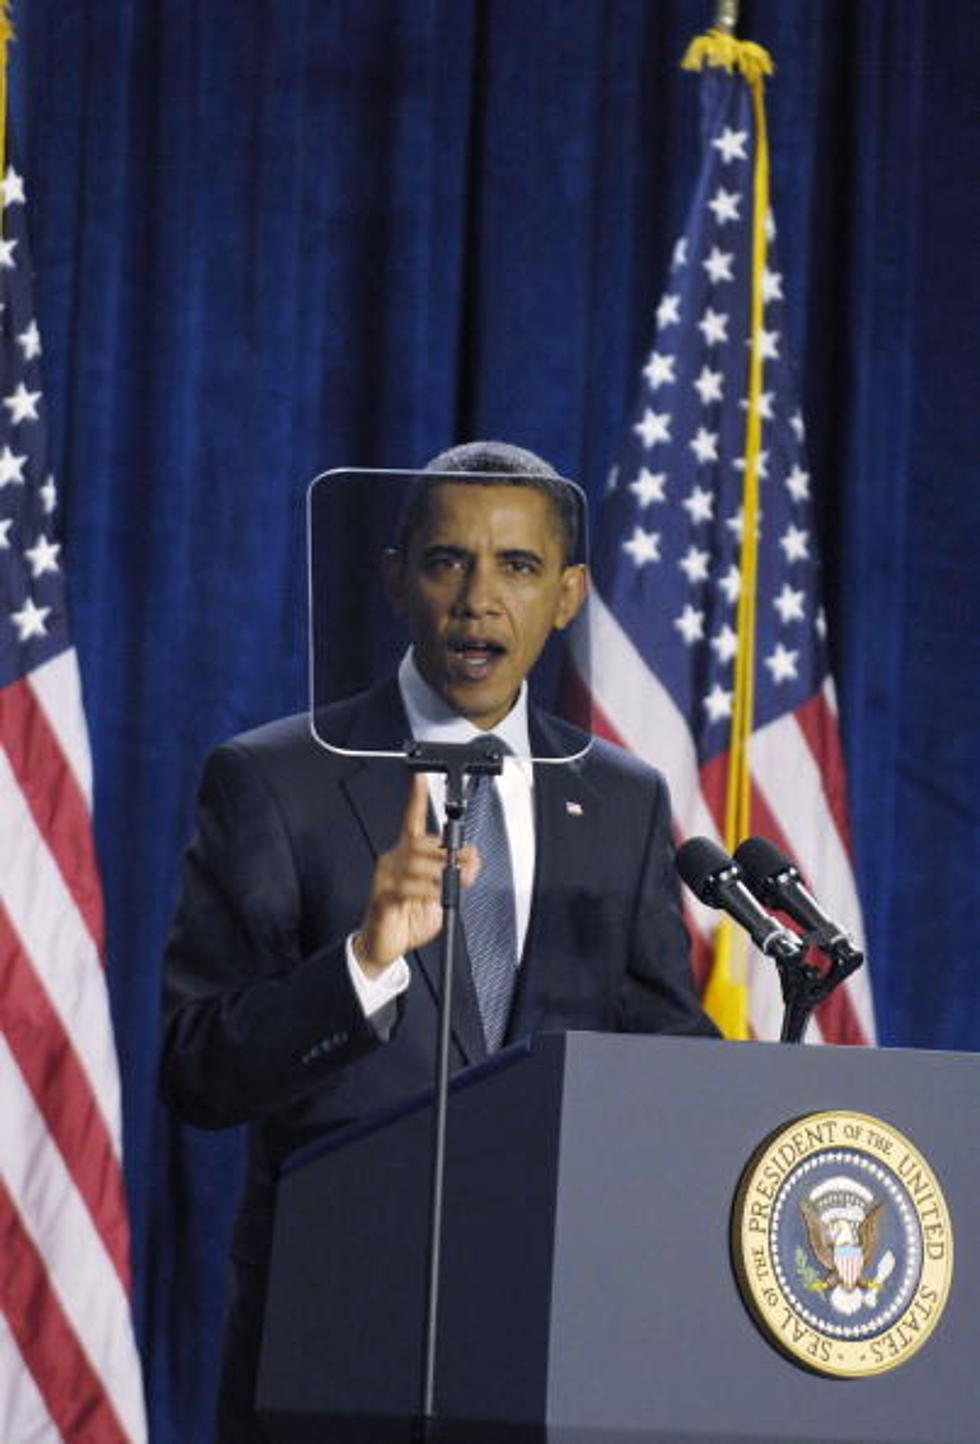 President’s TelePrompTer Stolen…There’s Something Poetic About that…